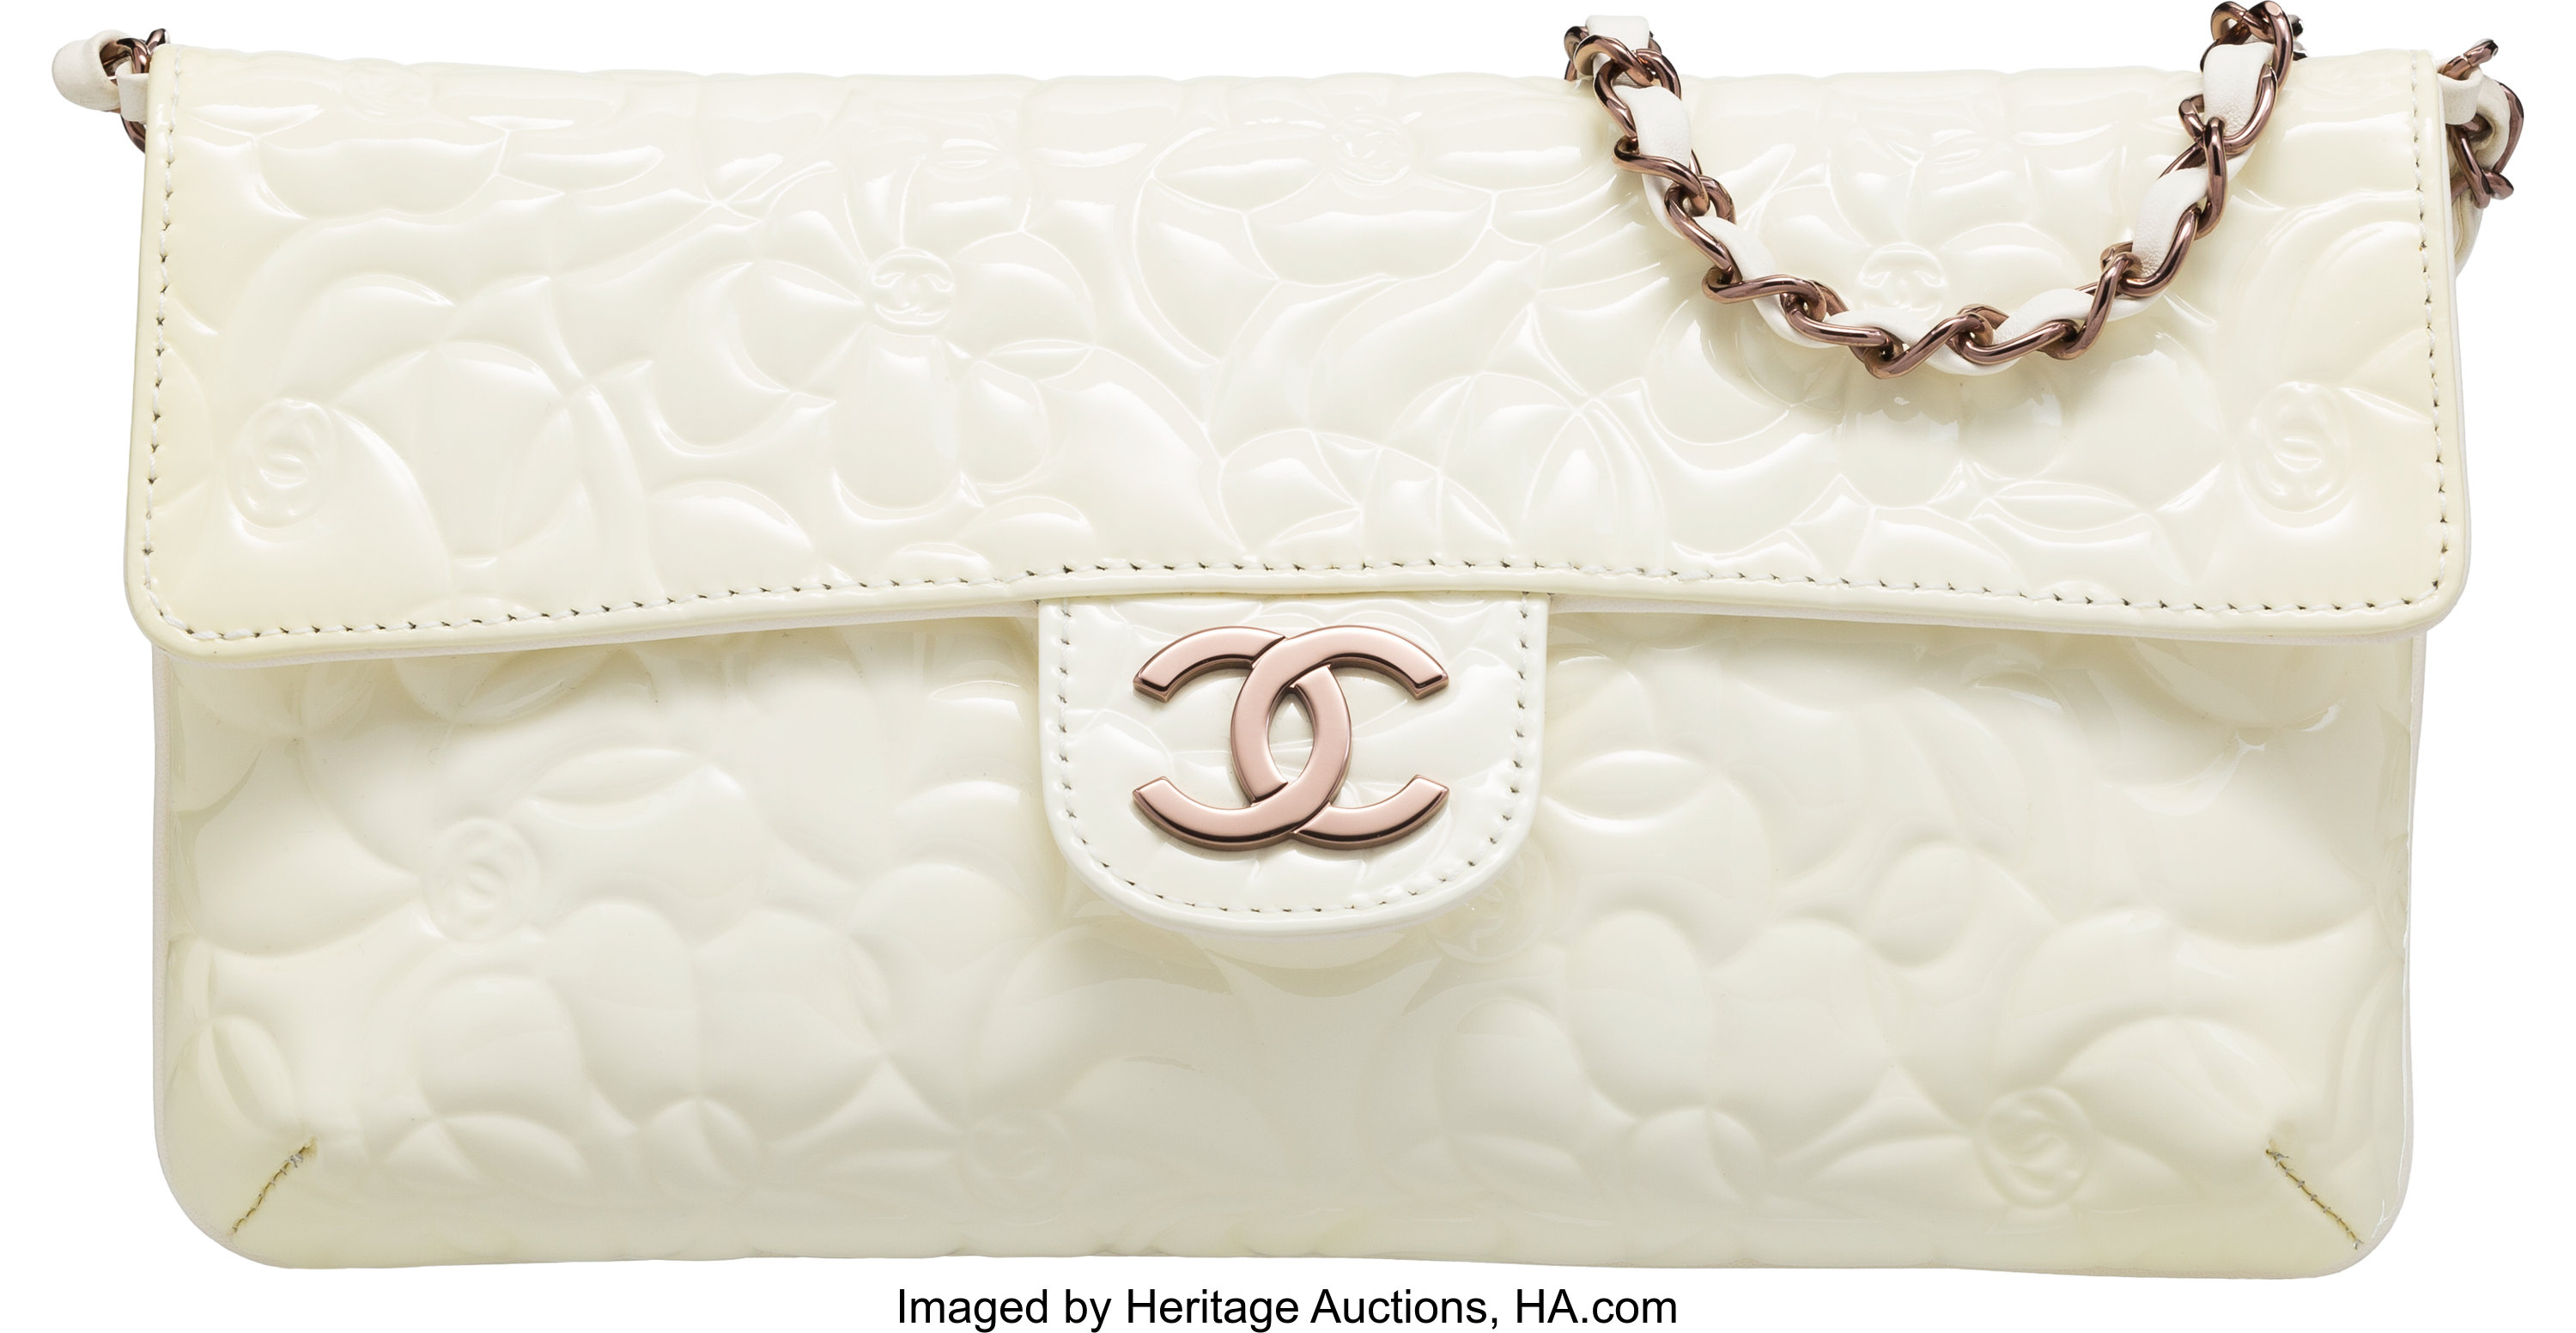 Chanel White Patent Leather Camellia Embossed Clutch with Rose